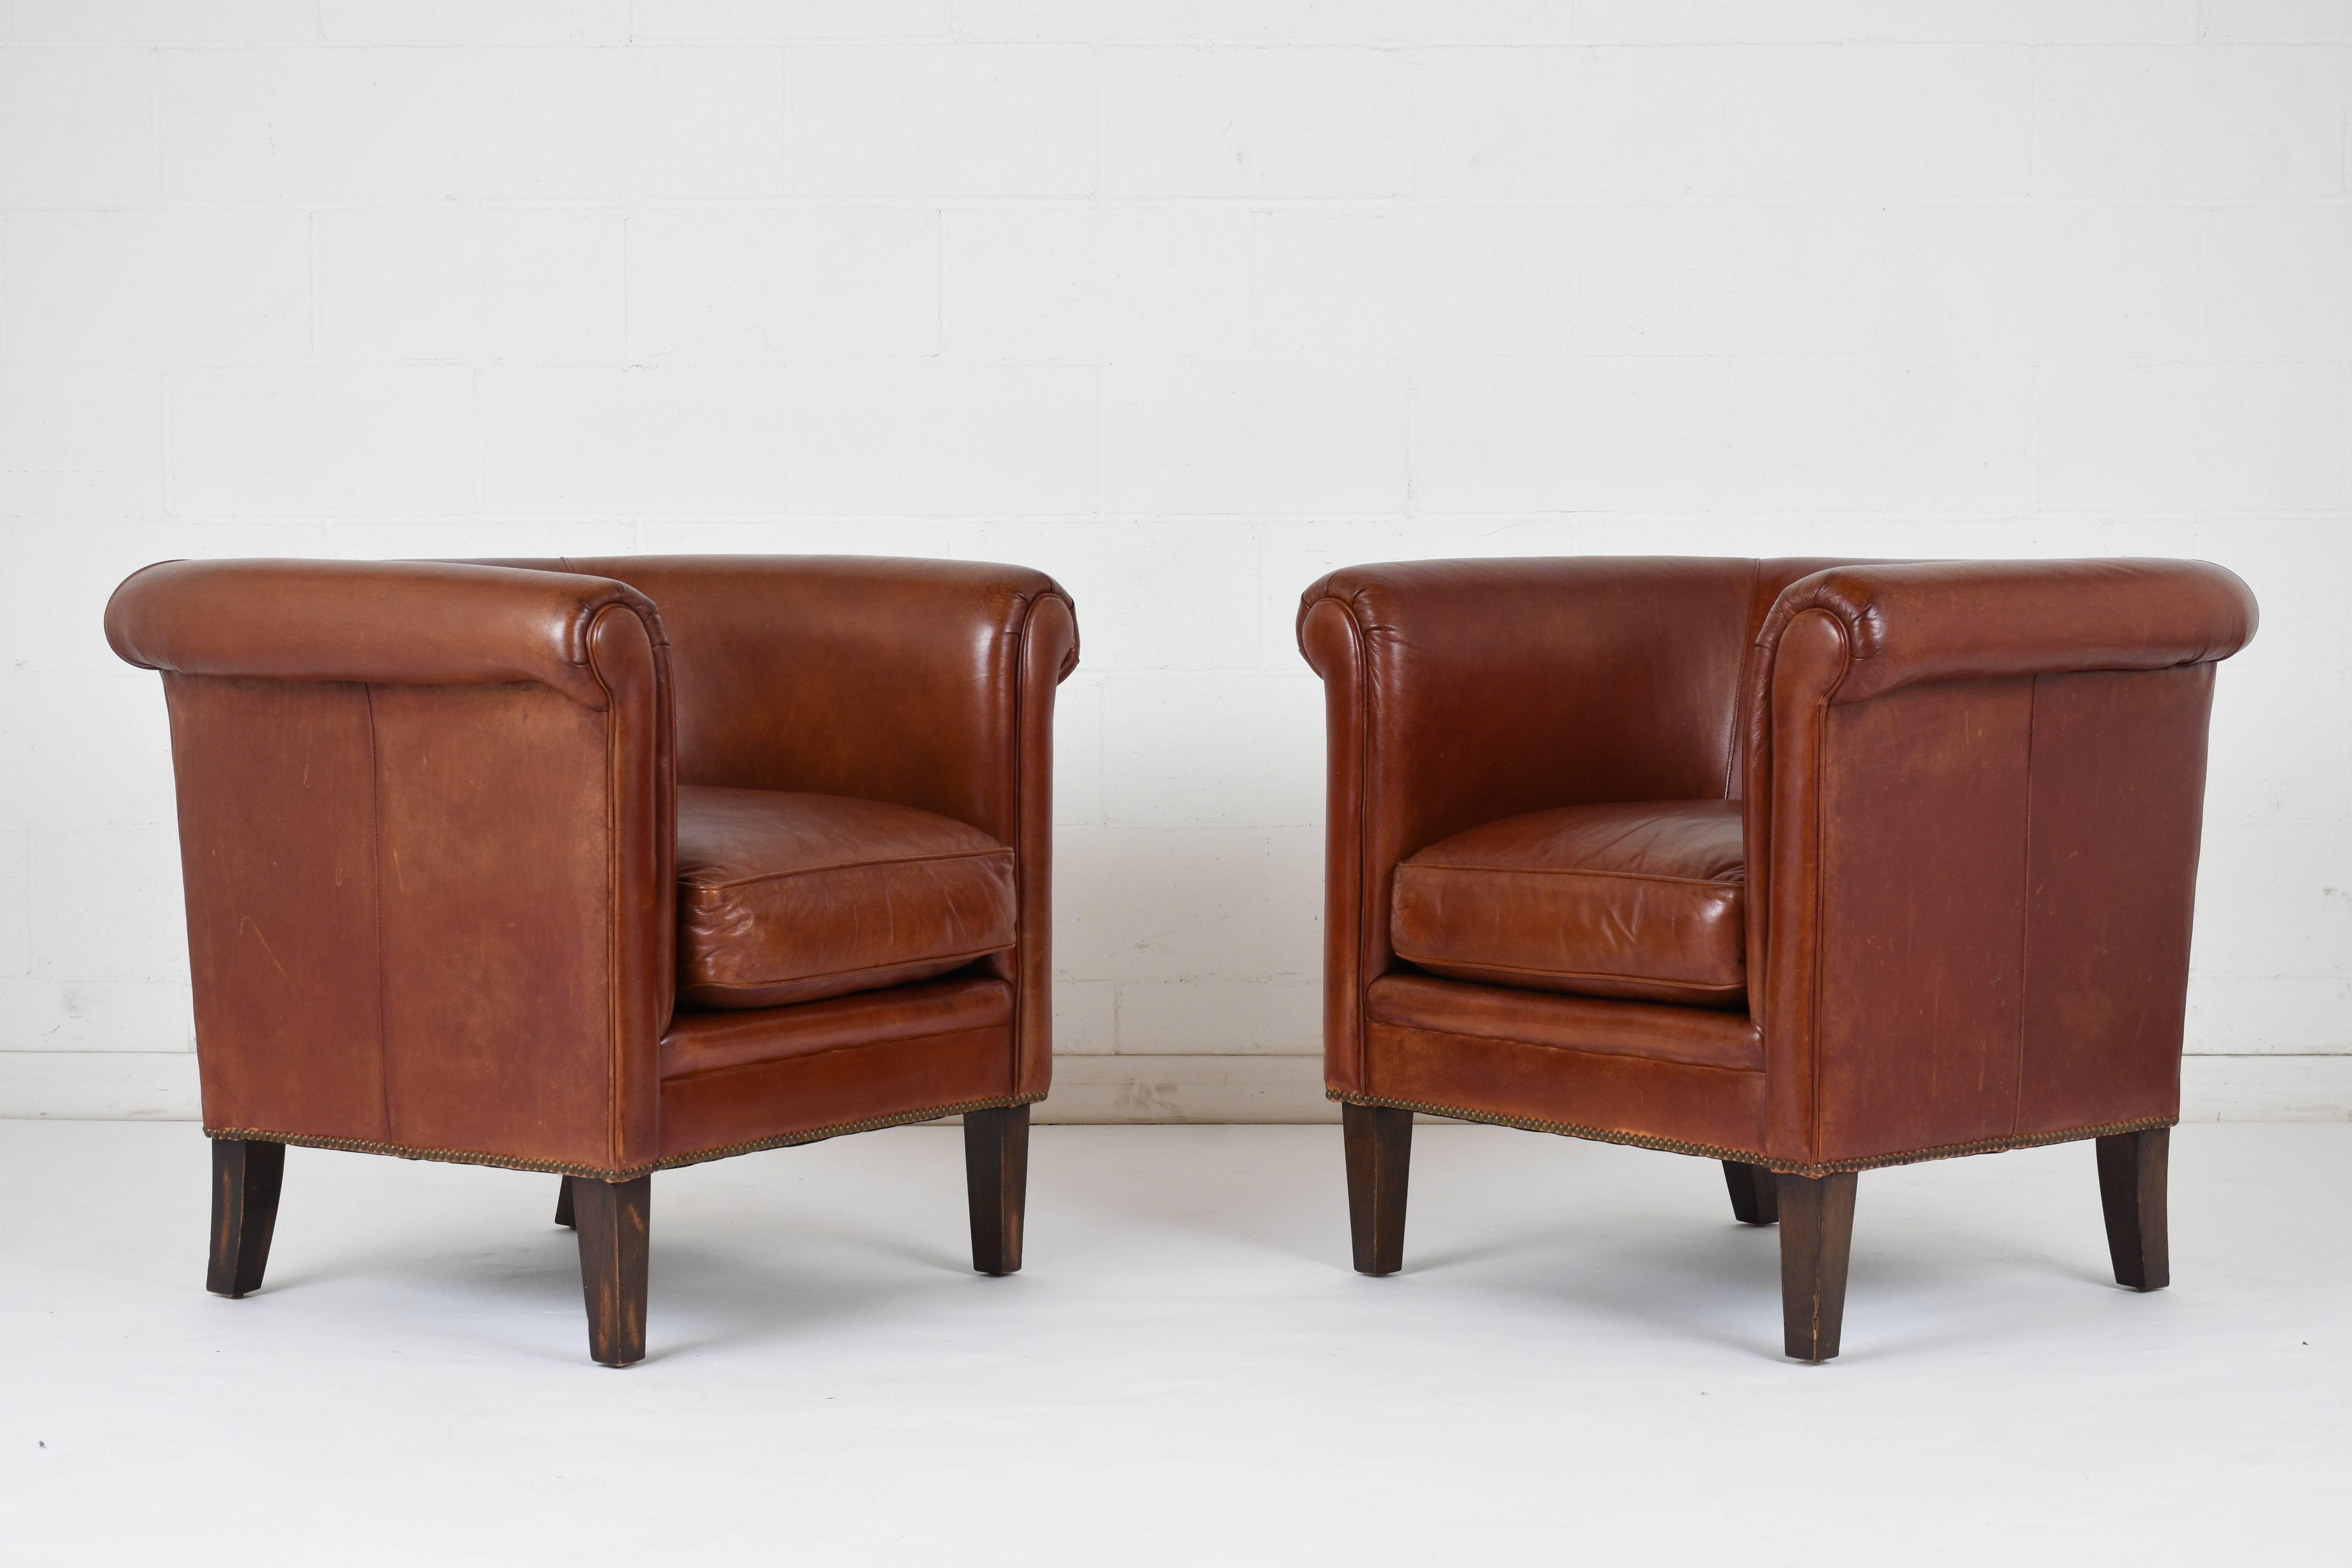 This pair of 1970s Regency-style club chairs are made by Bernhardt and have a traditional profile with a curved back and scroll arms. The seats feature the original cognac color leather upholstery with single piping trim and brass nail head details.